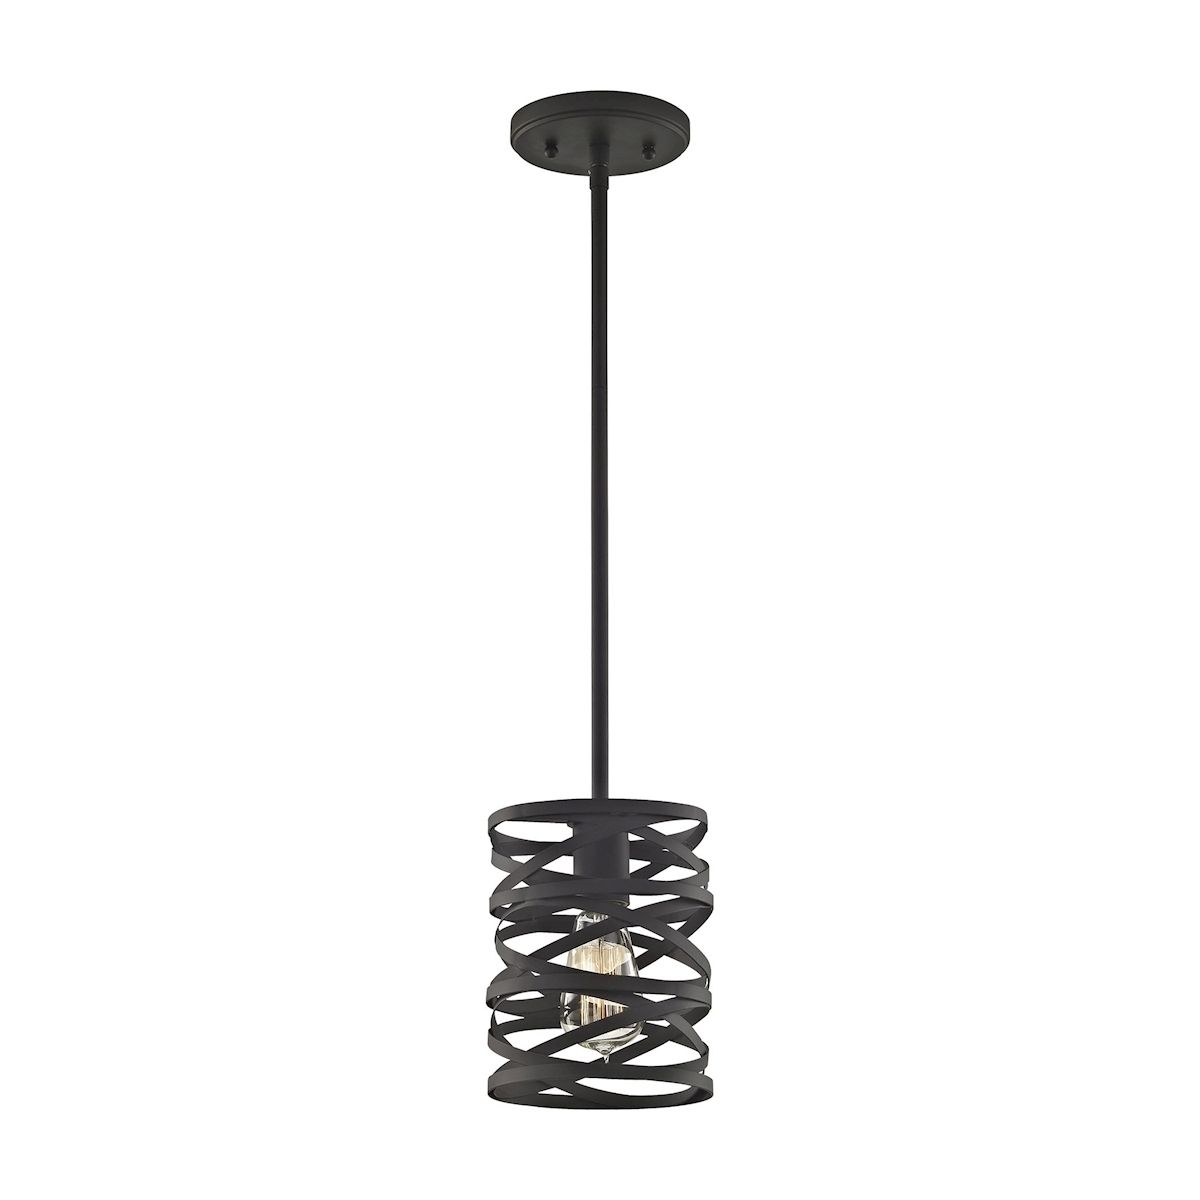 Vorticy 1 Light Mini Pendant In Oil Rubbed Bronze With In Textured Glass And Oil Rubbed Bronze Metal Pendant Lights (View 5 of 15)